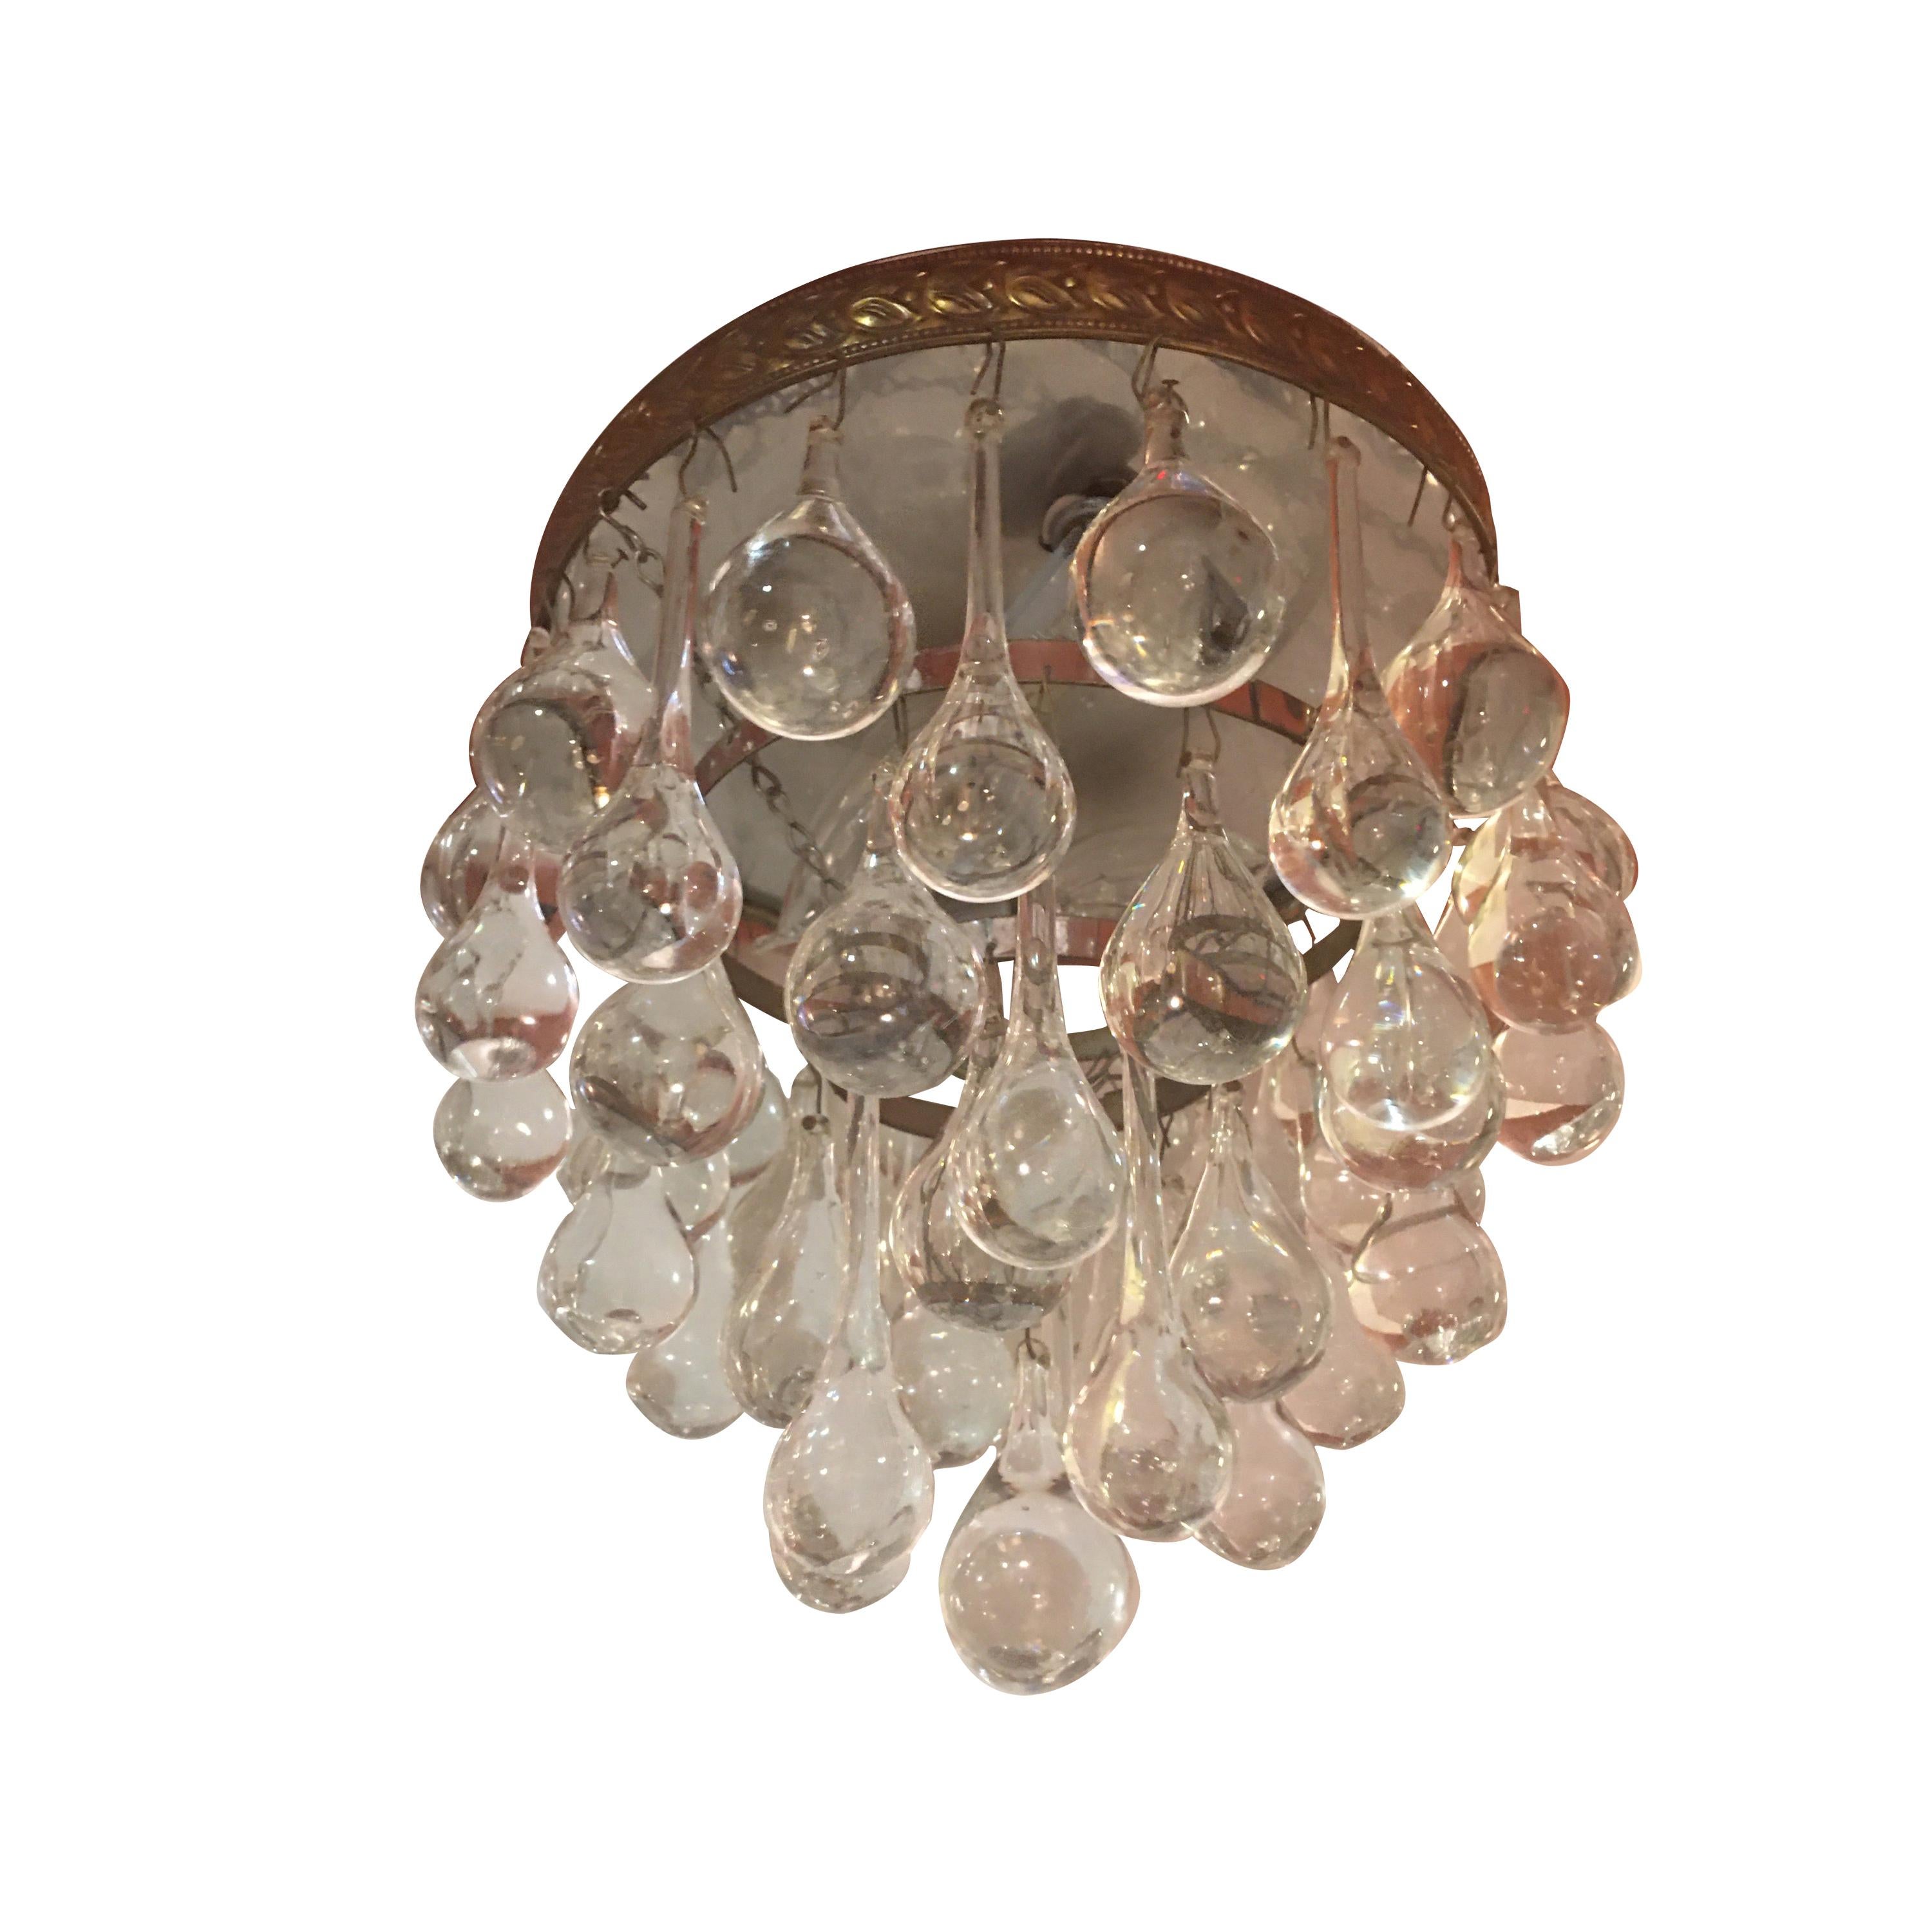 Small Tear Drop Ceiling Fixture 2 AVAILABLE!